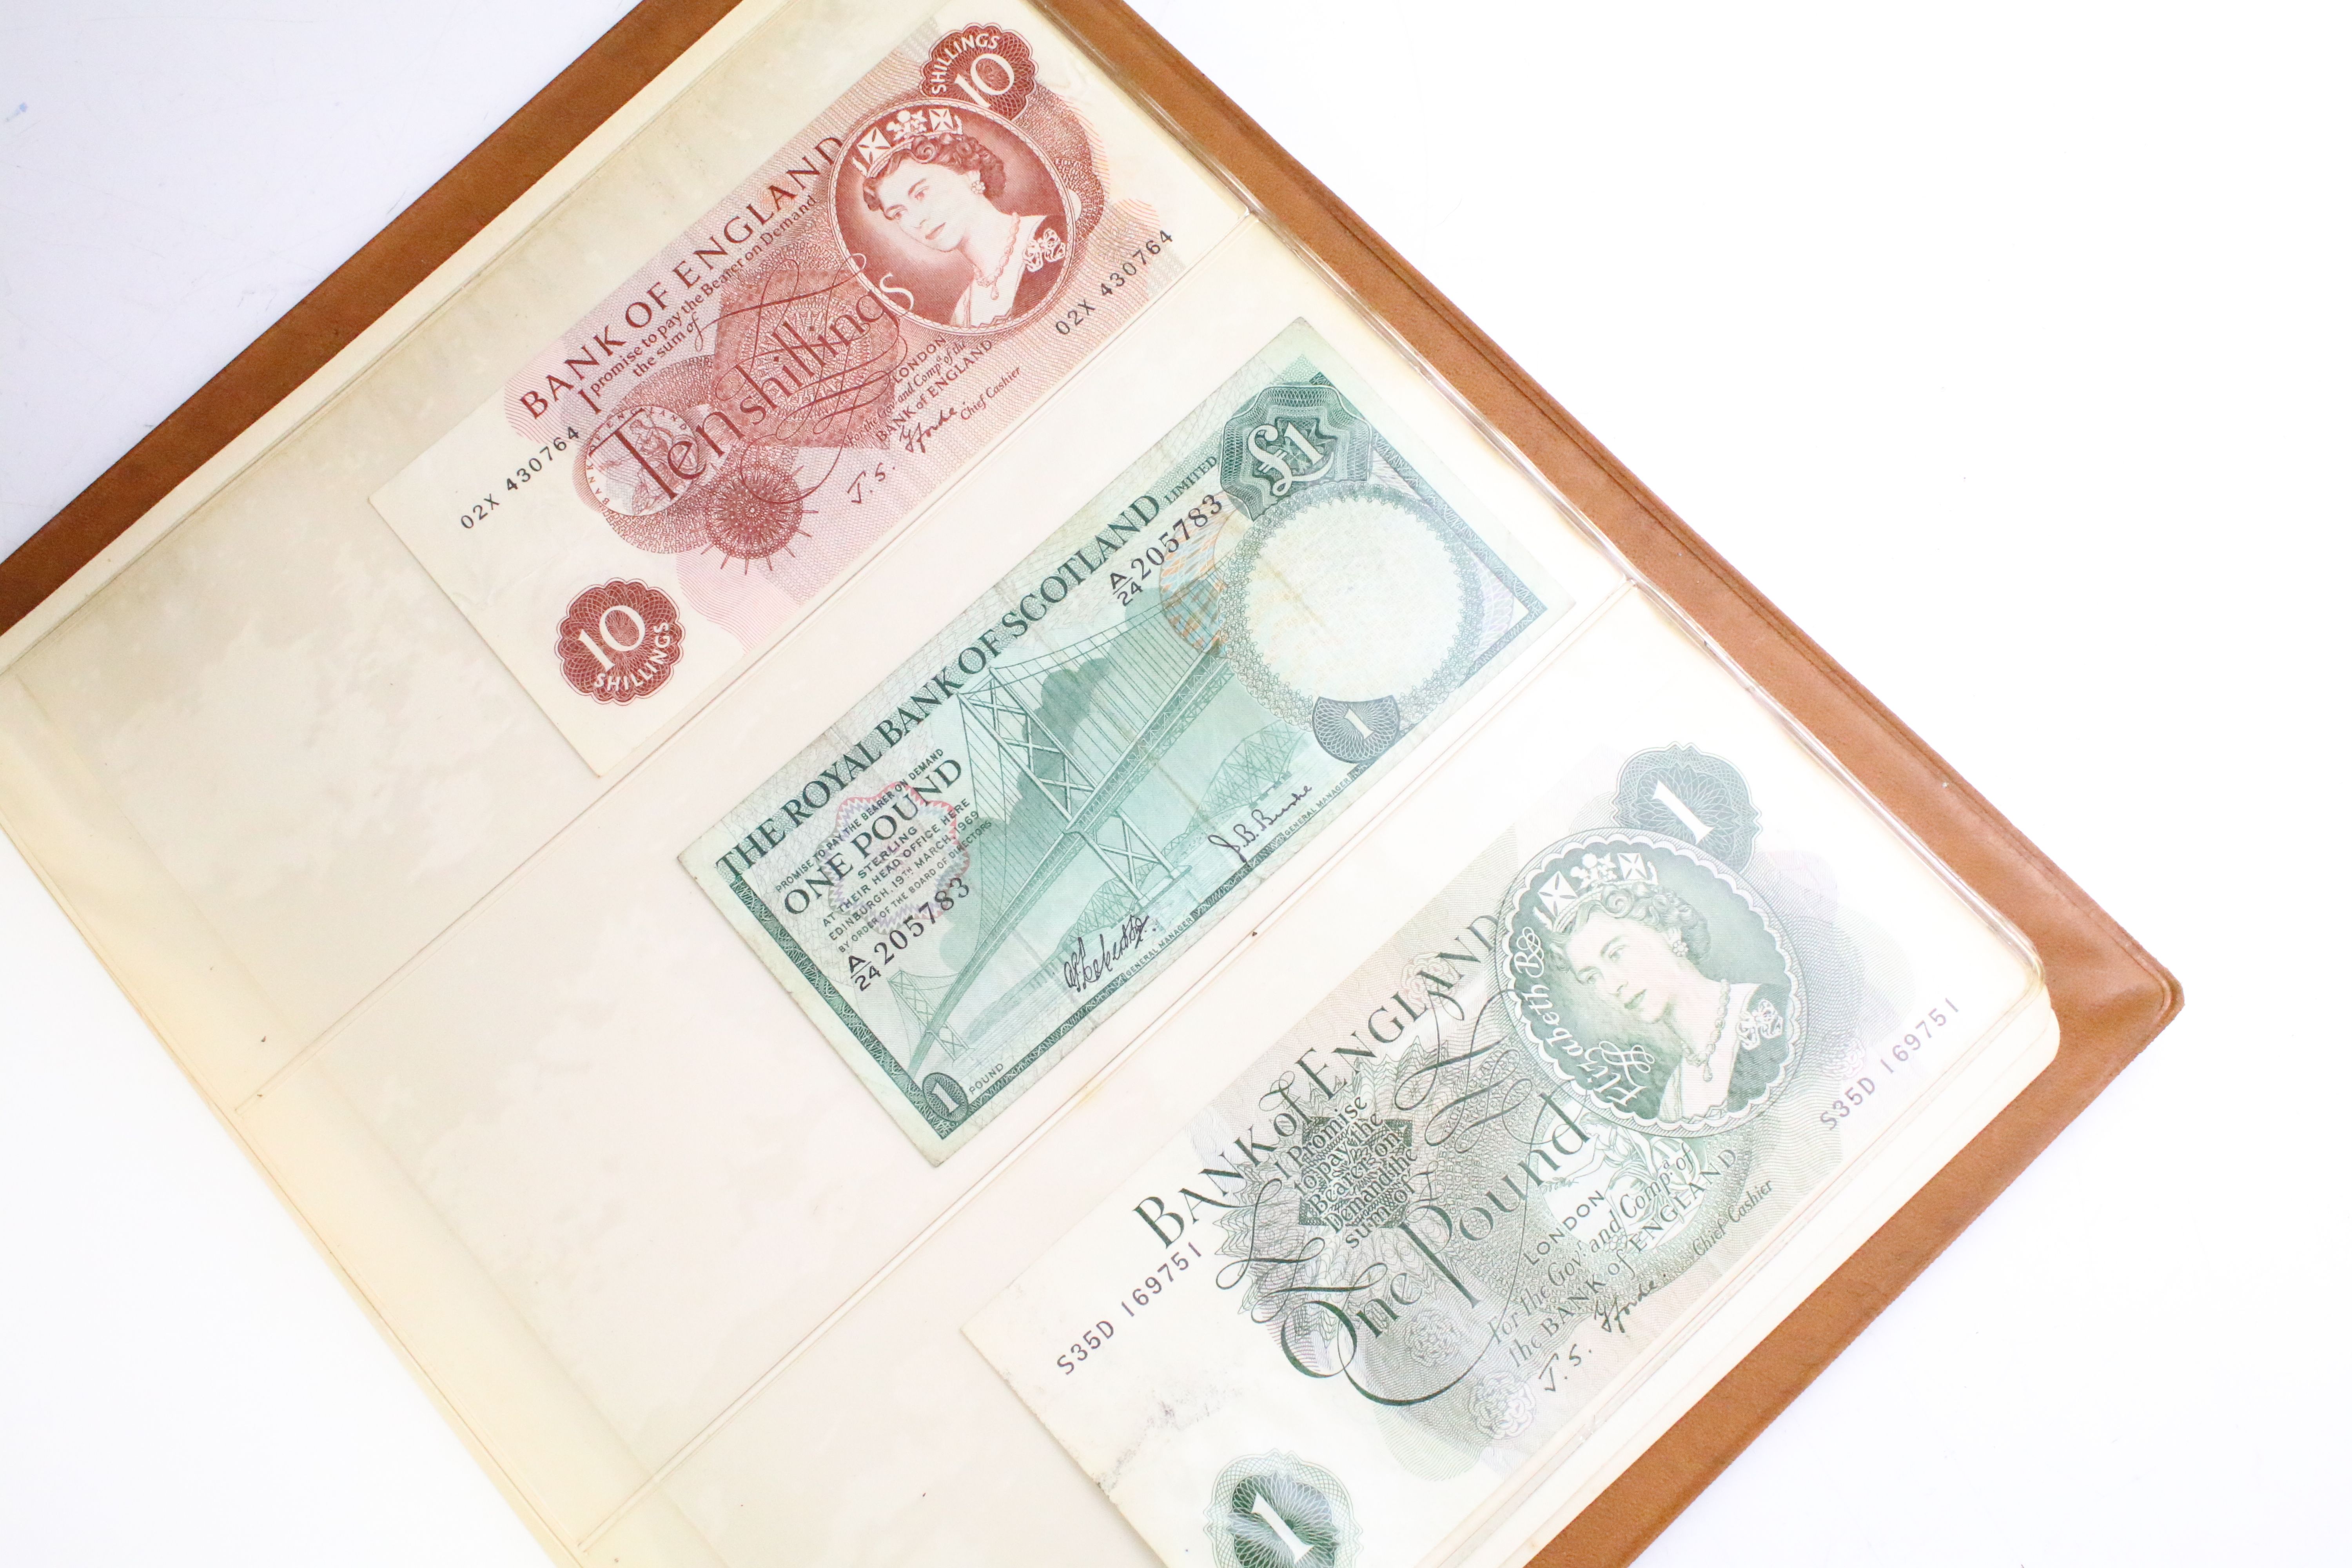 A small collection of British and World banknotes contained within a collectors album. - Image 8 of 9